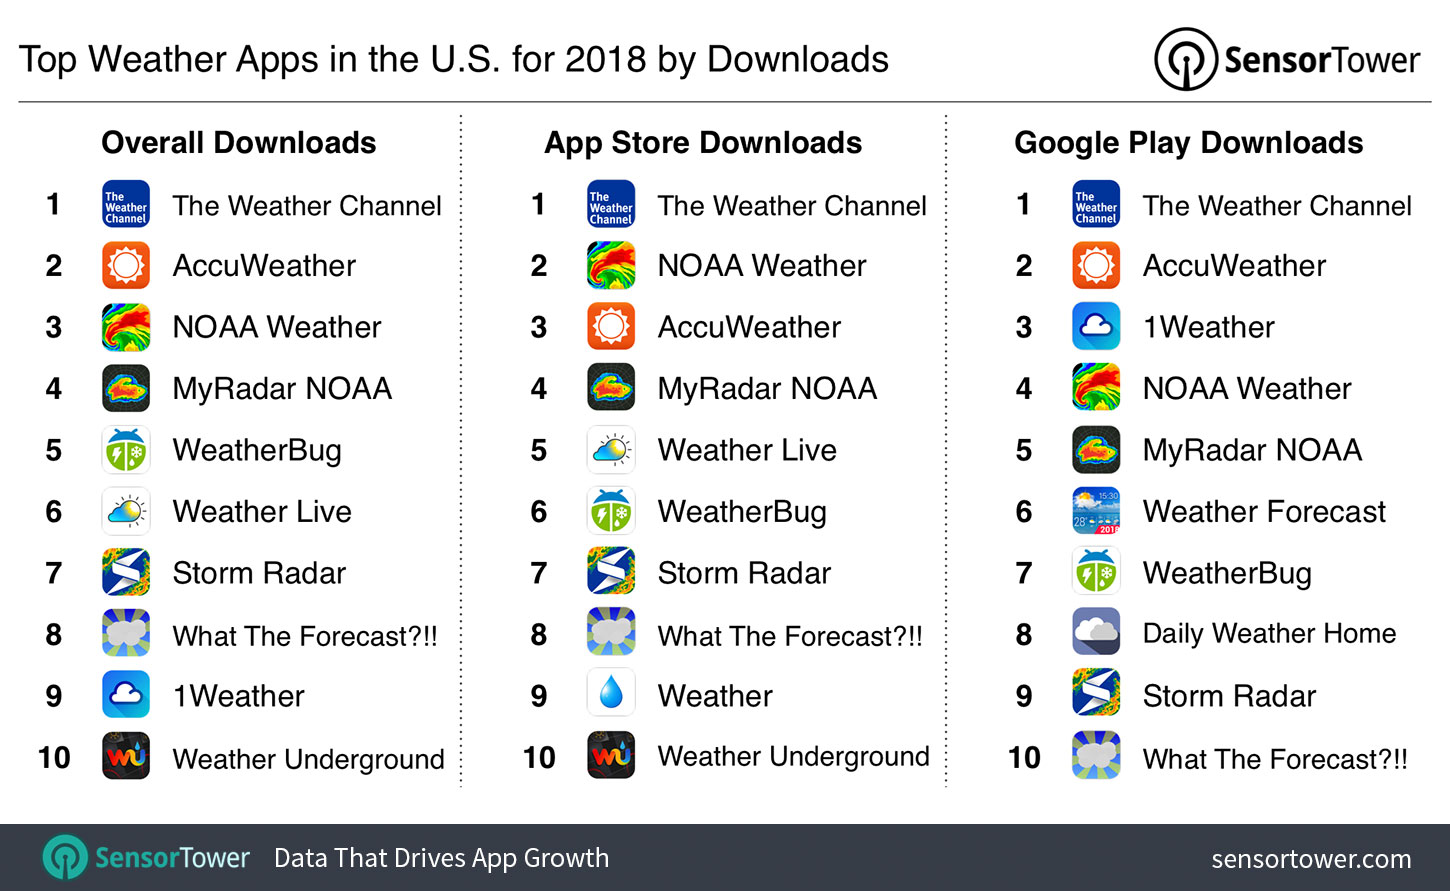 Top Weather Apps by Downloads in the U.S. for 2018